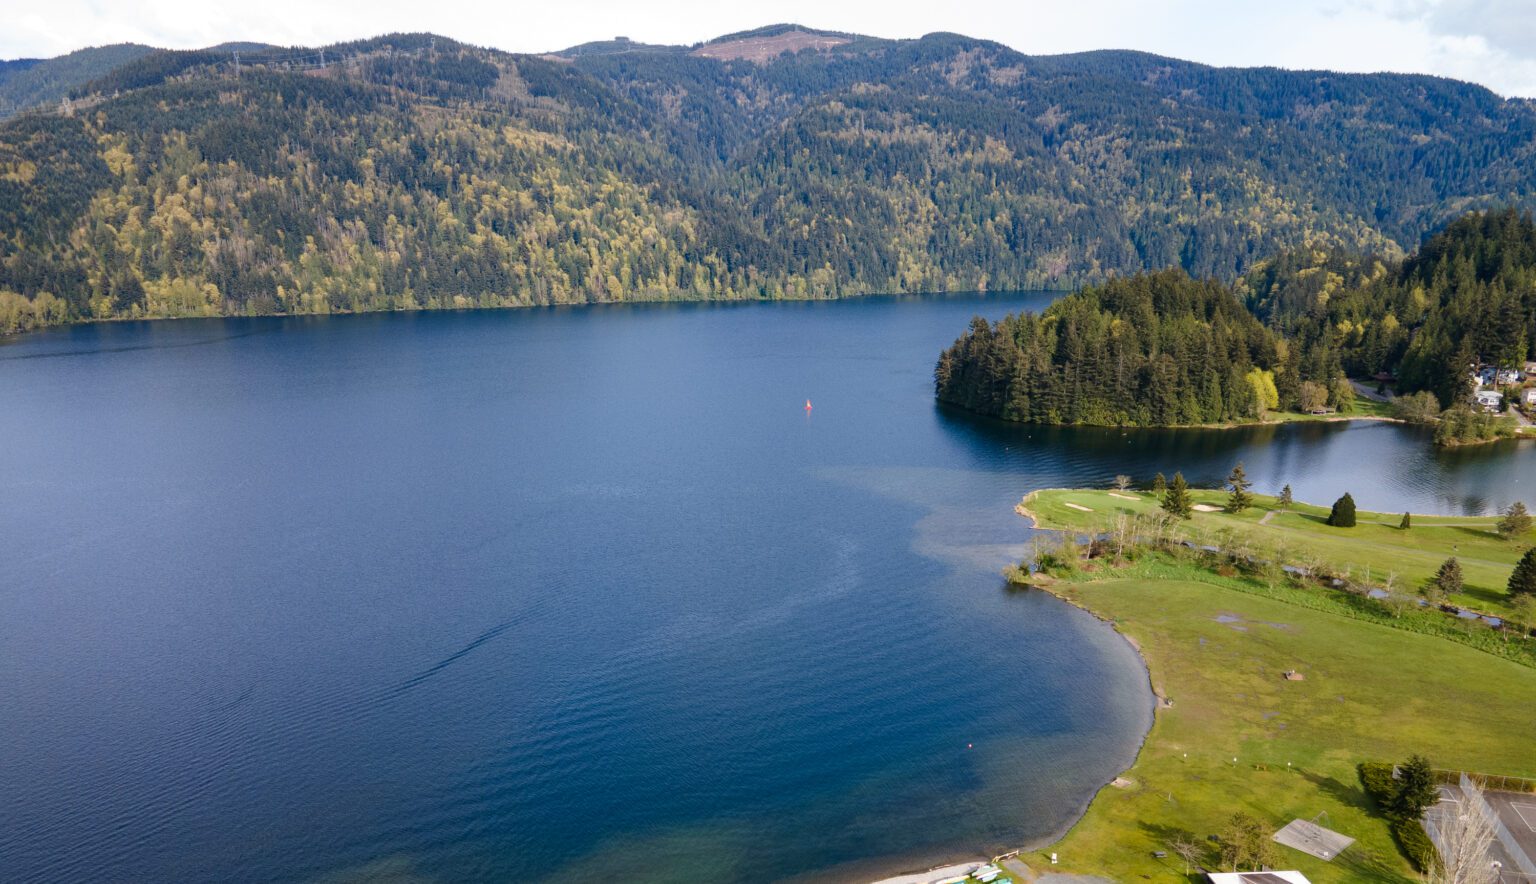 Water quality in Lake Whatcom has slightly improved over the last year